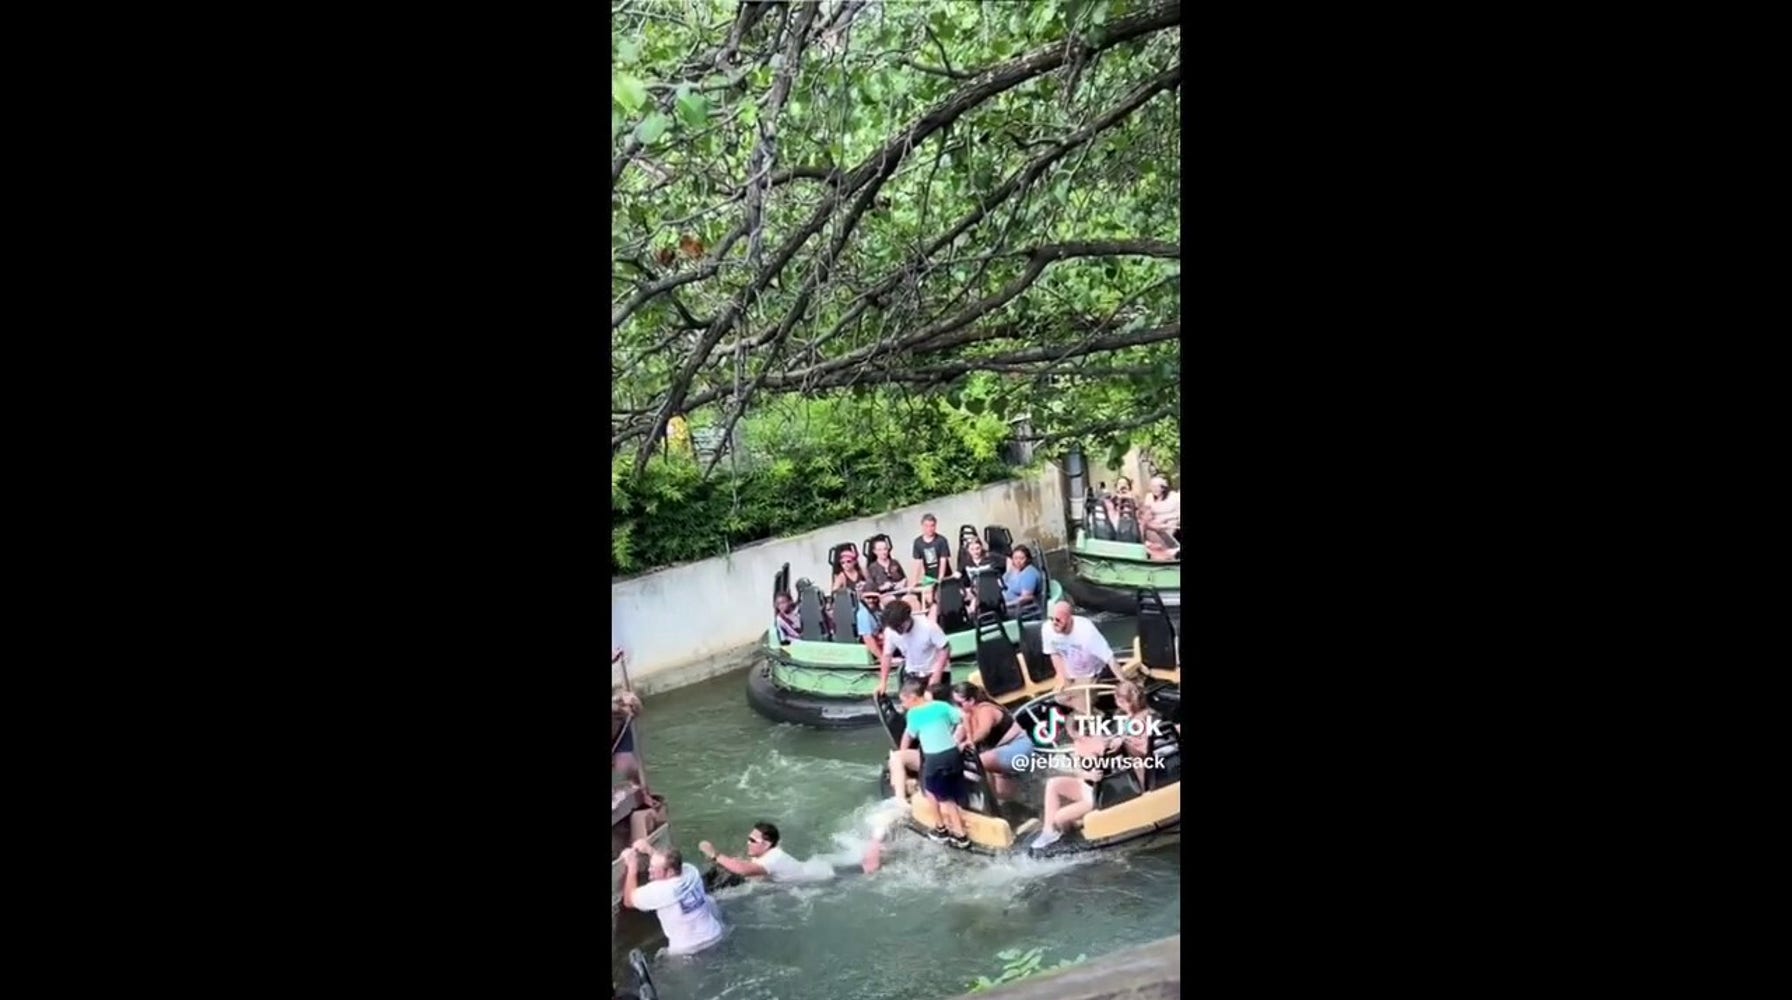 Six Flags Over Texas Roaring Rapids Malfunction Sends Guests Leaping into Water